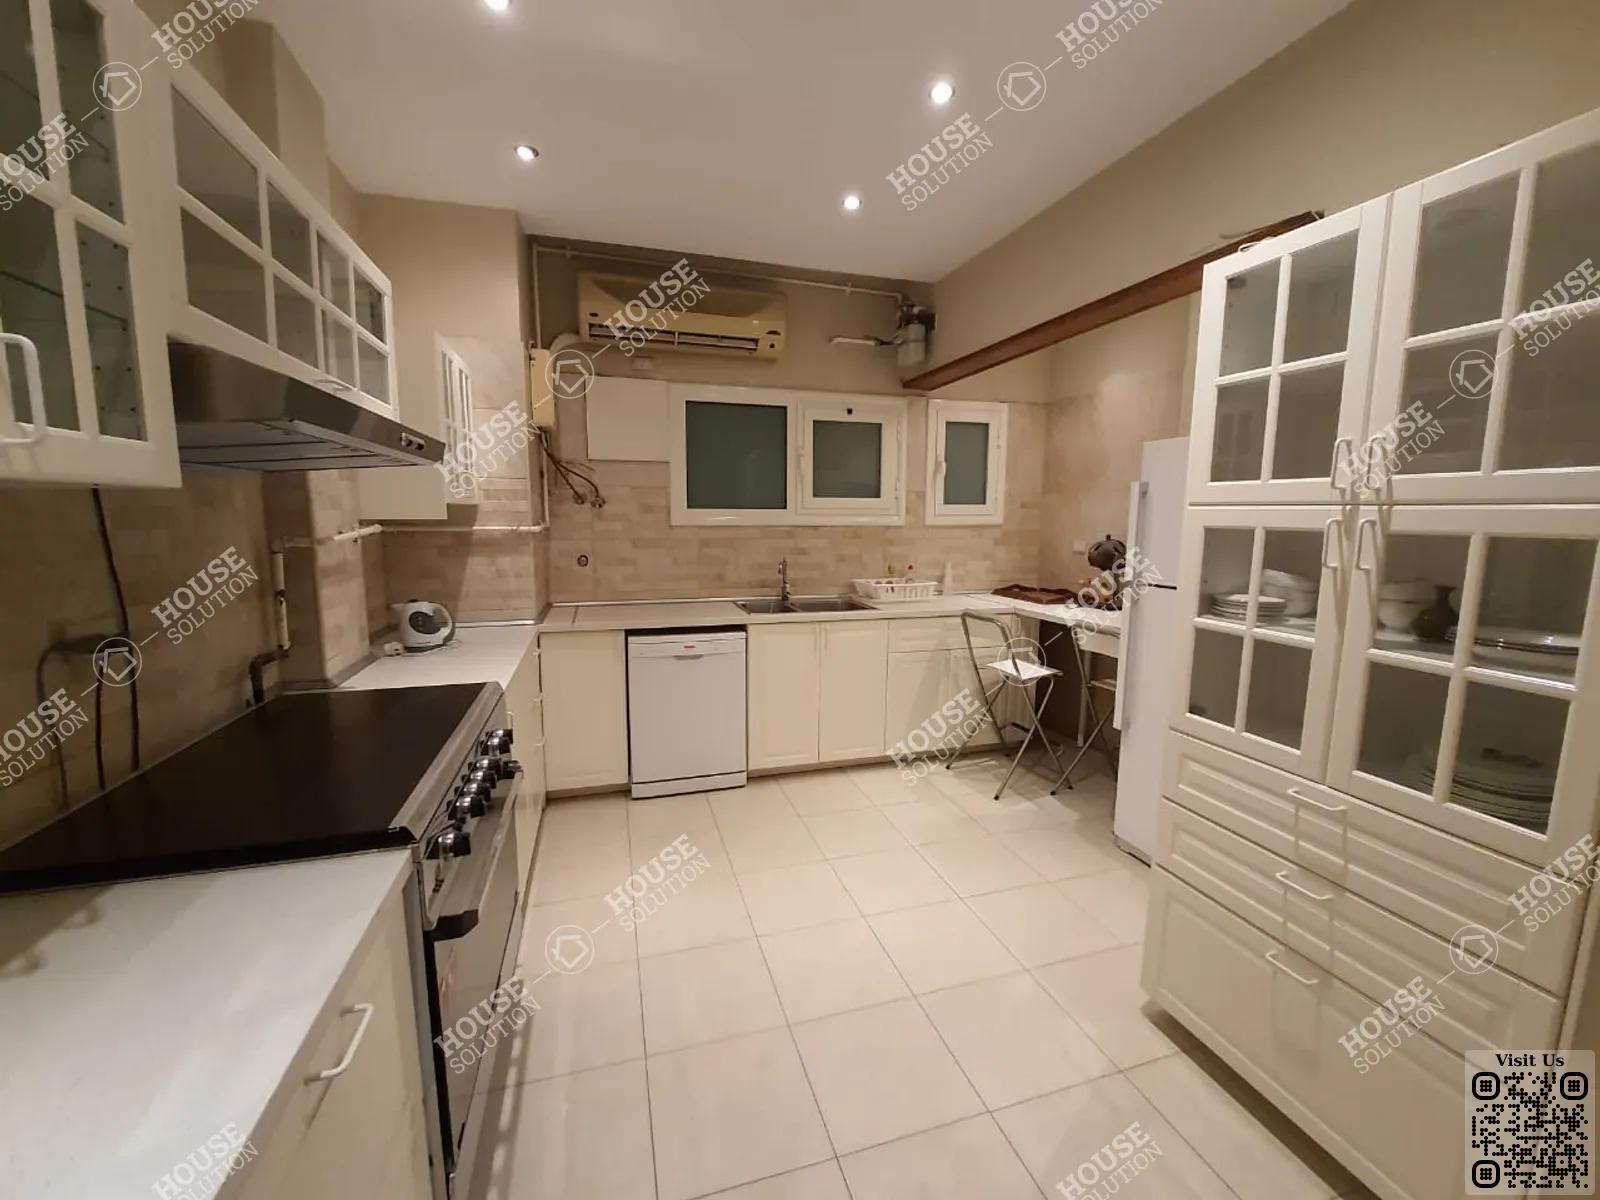 KITCHEN  @ Apartments For Rent In Maadi Maadi Degla Area: 210 m² consists of 3 Bedrooms 2 Bathrooms Modern furnished 5 stars #4827-2